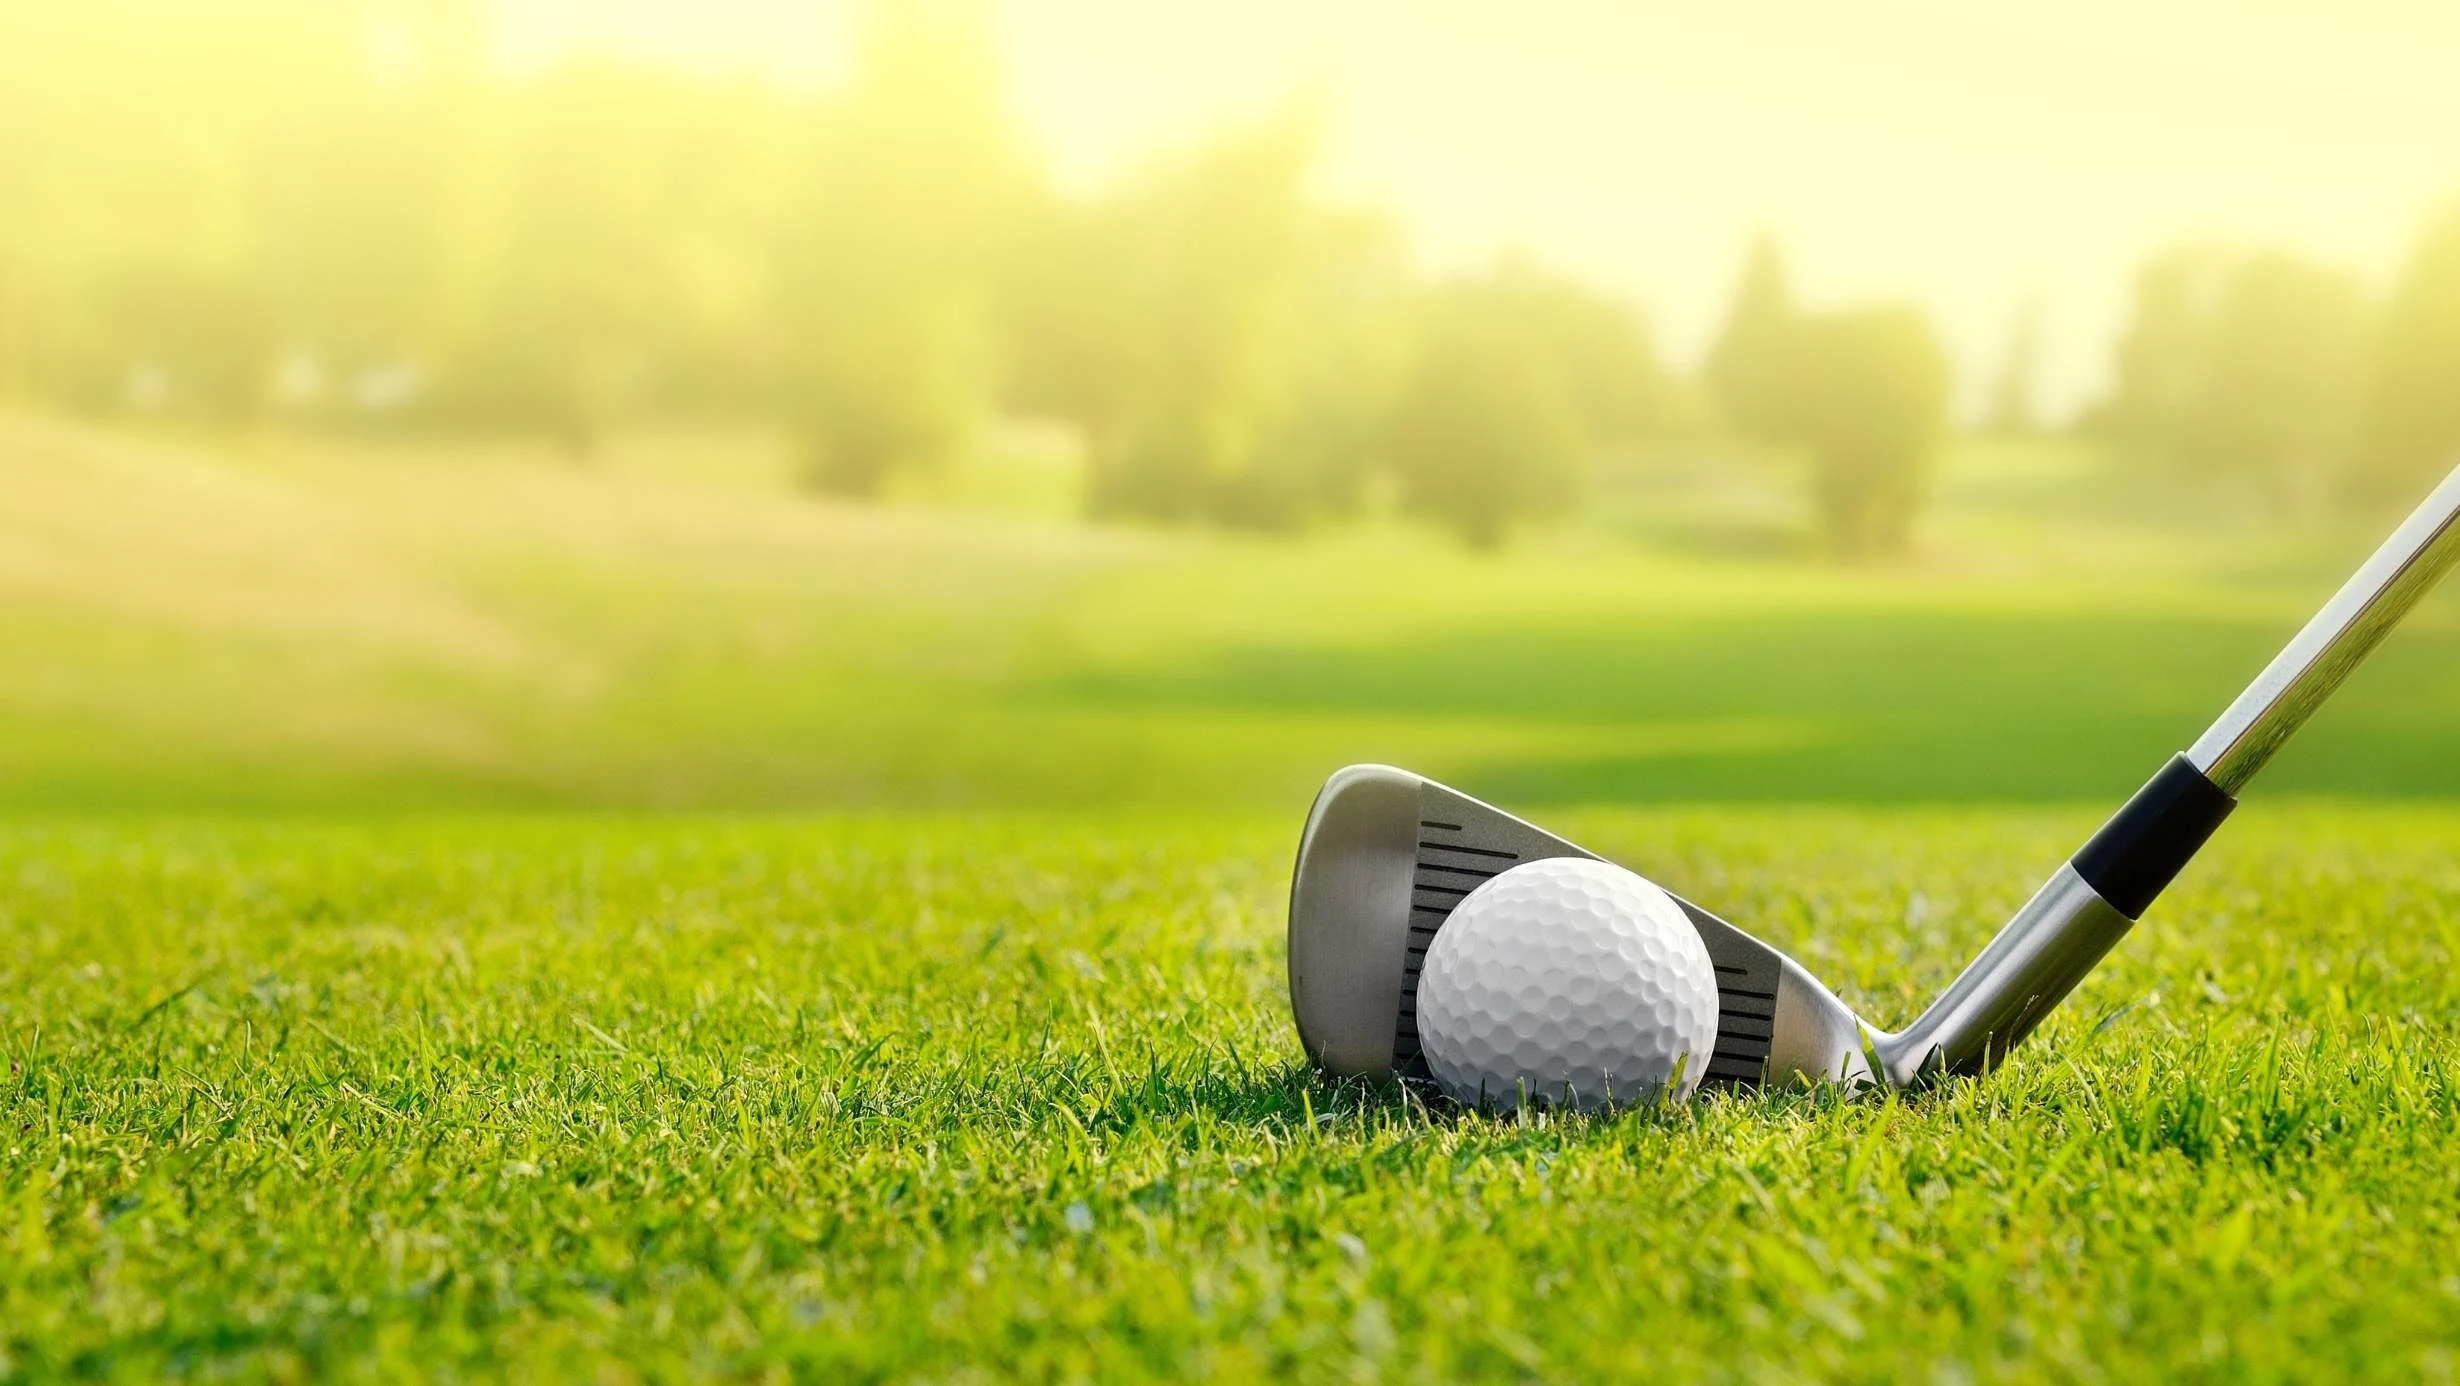 Stock image from Canva Pro of a golf club about to hit a ball of a green golf course on a hazy sunny day